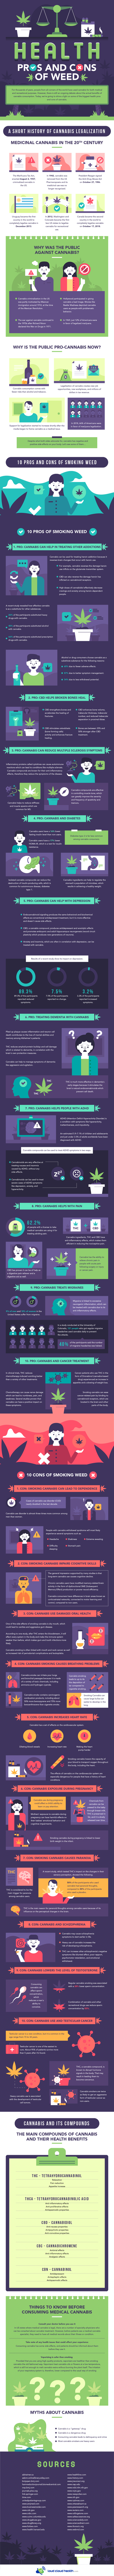 Health Pros & Cons Of Weed - Infographic